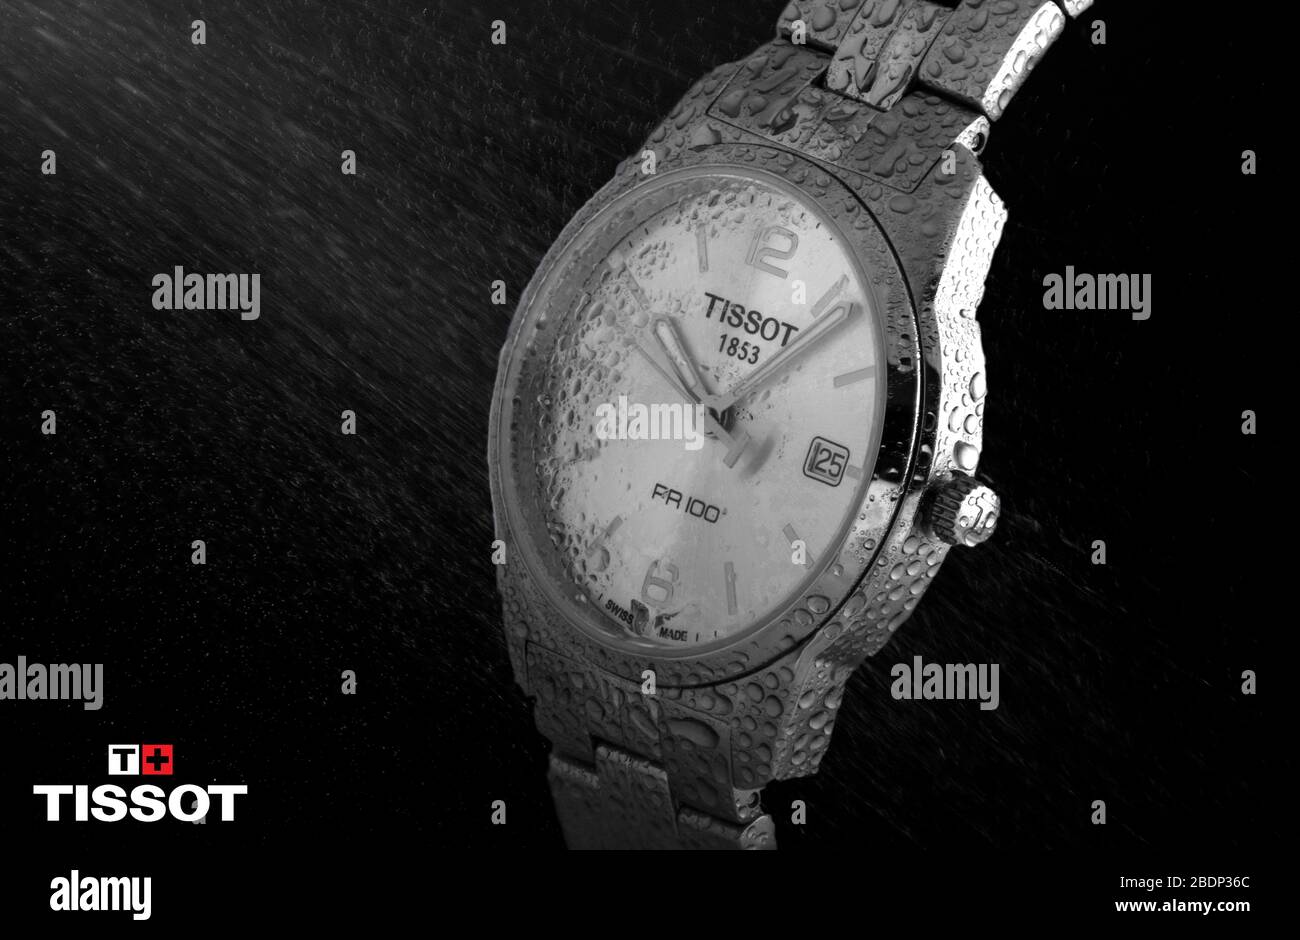 Alexandria, Egypt March 3, 2020 Tissot classic watch advertising with water drops under the rain Stock Photo